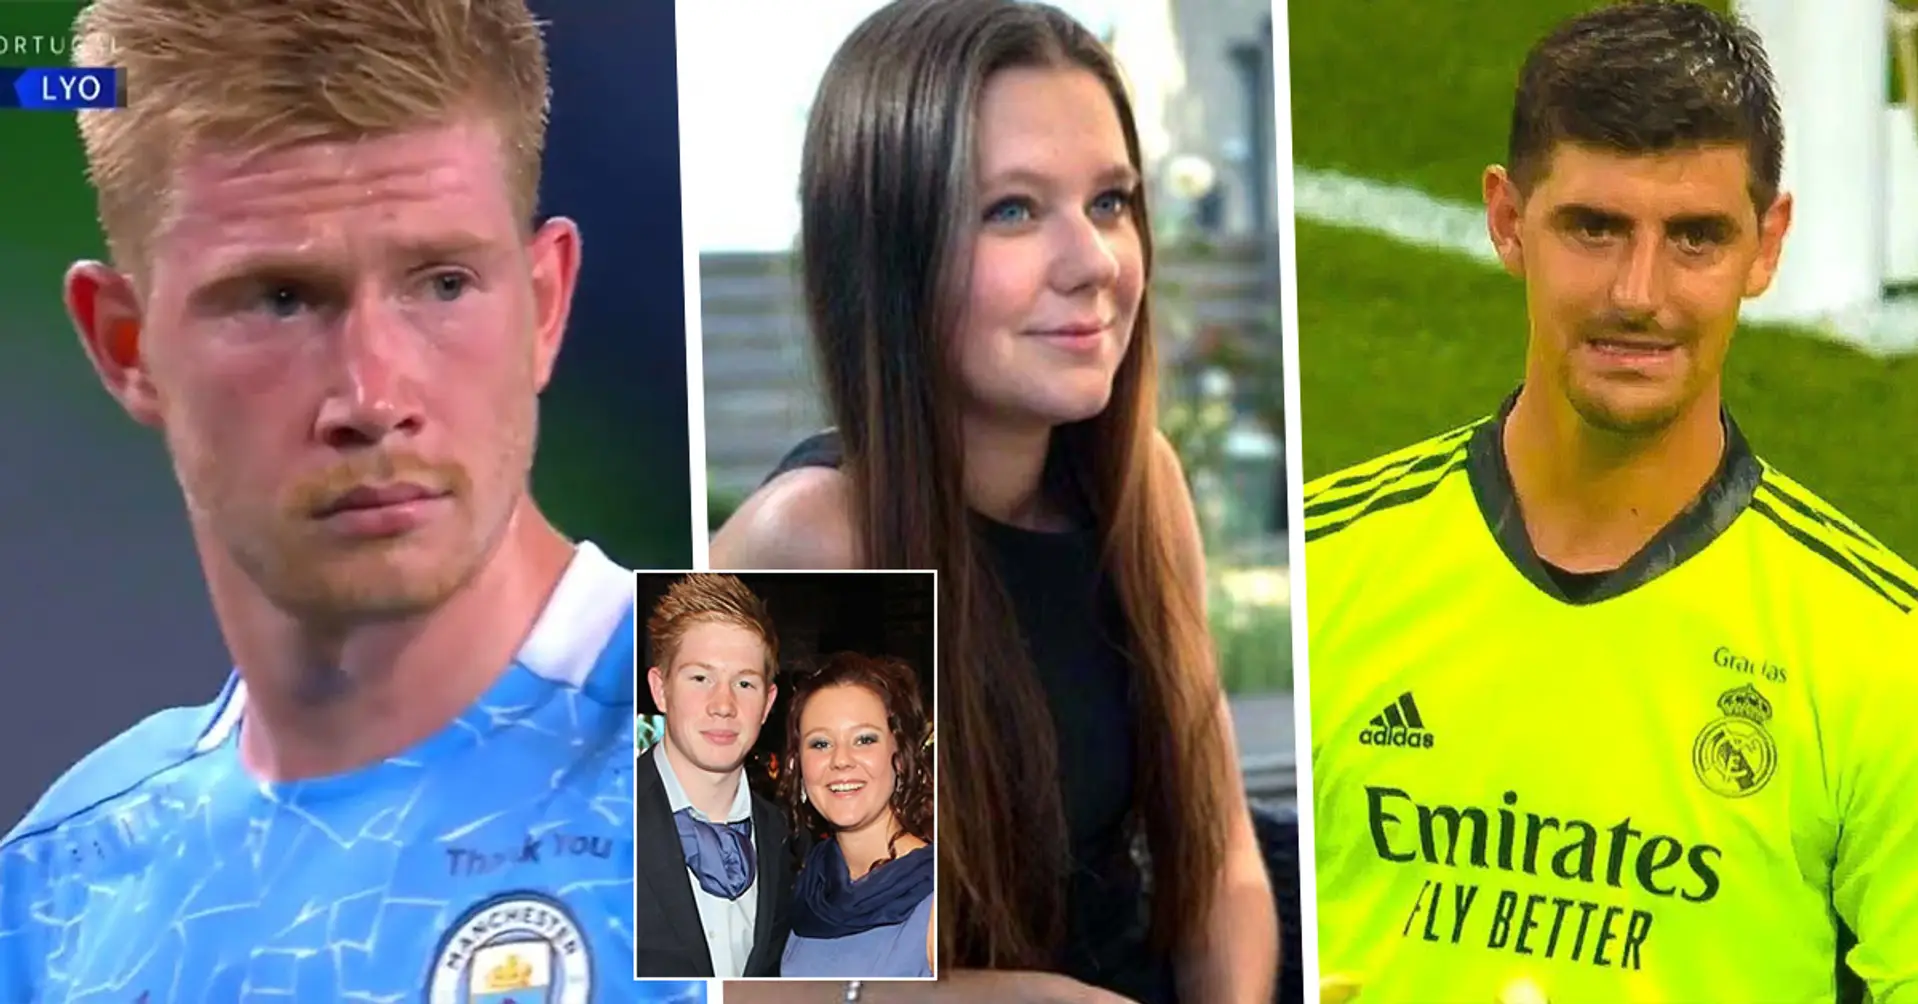 De Bruyne’s ex-girlfirend: ‘I found comfort in the arms of Courtois. He prepared me a delicious meal’